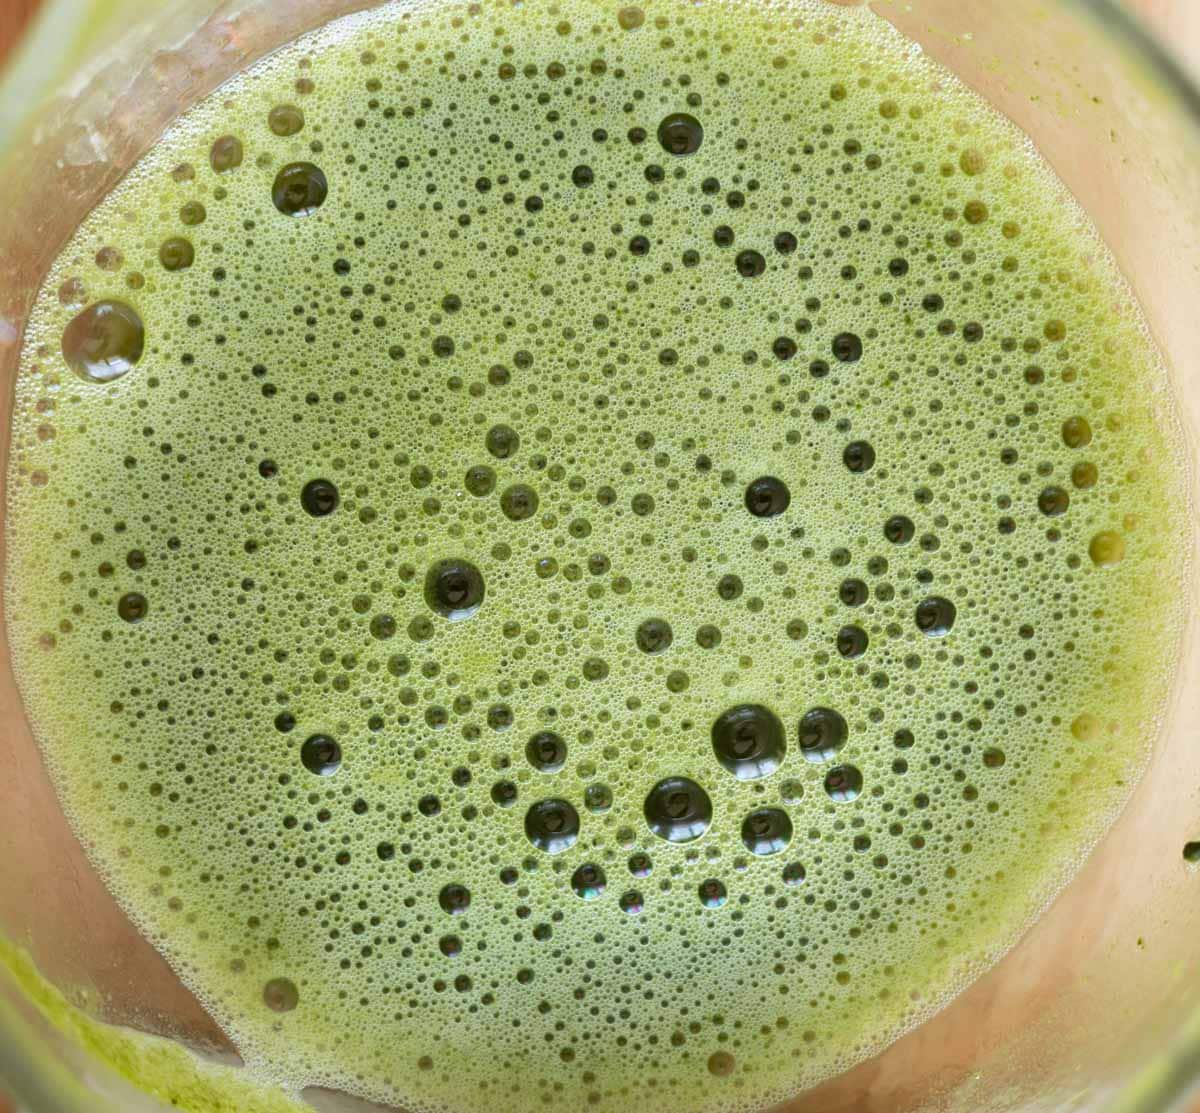 Frothy matcha powder whisked in hot water